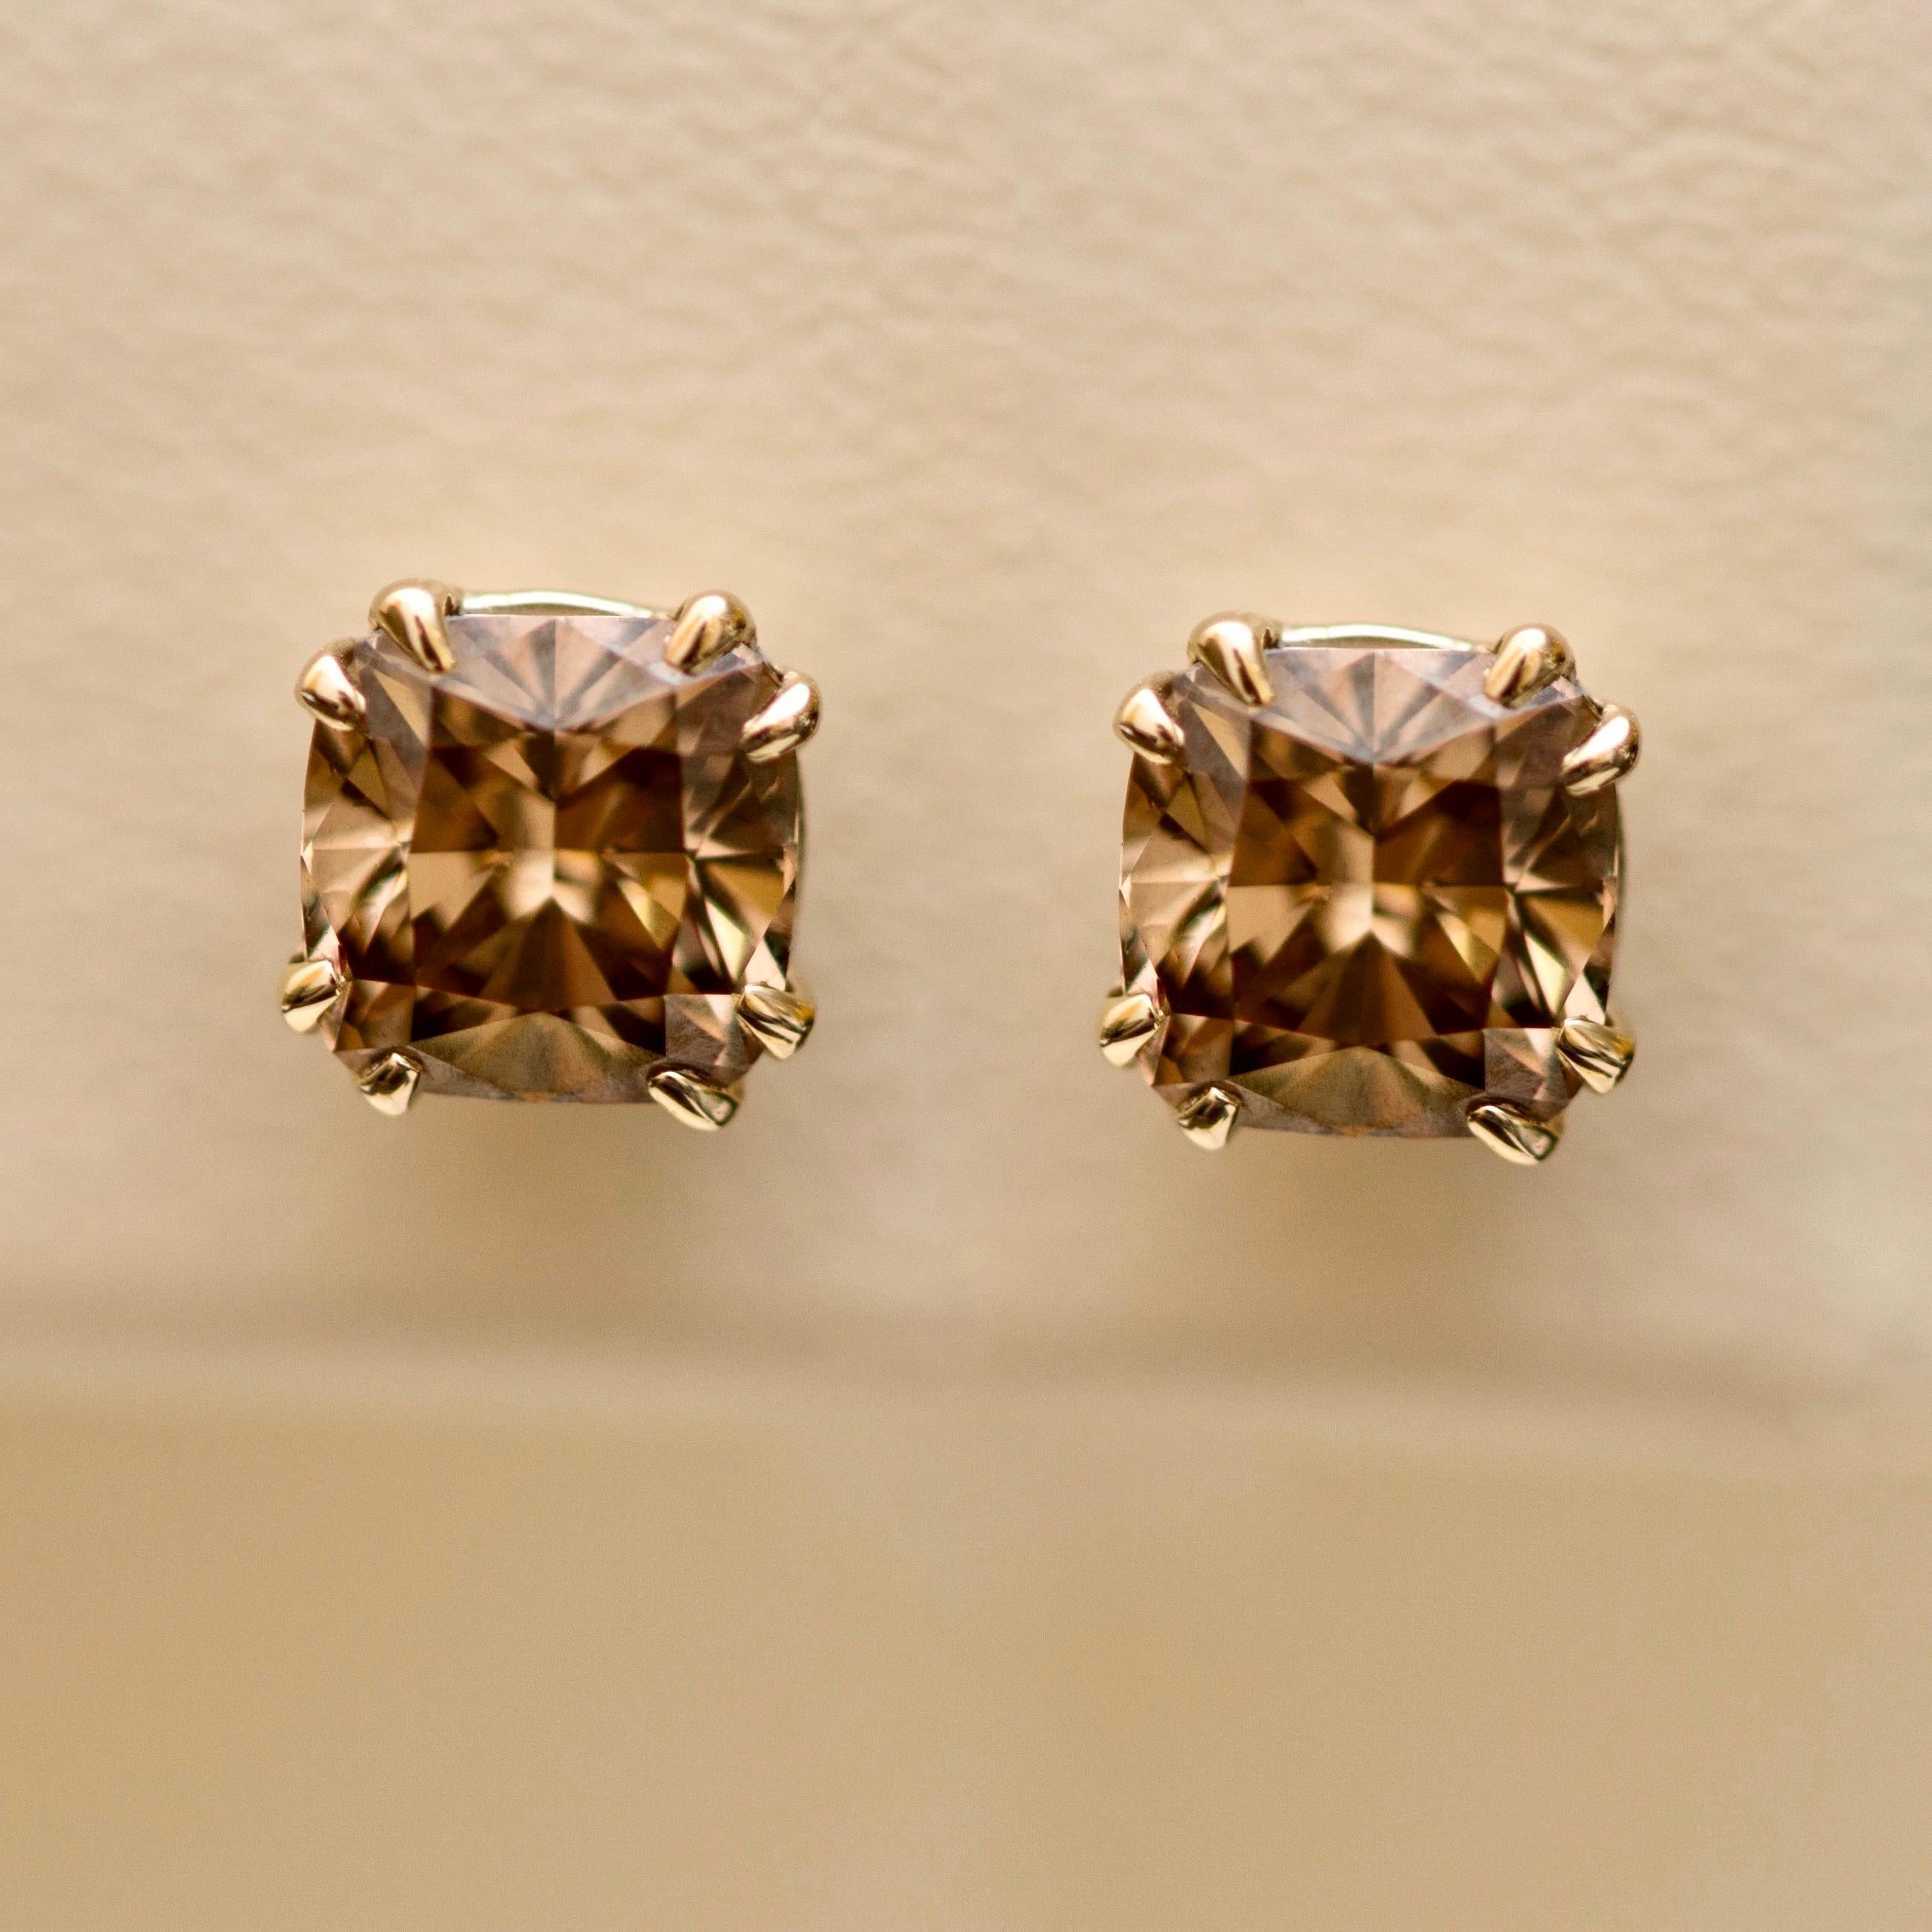 Diamond is the best choice if you are looking for something stylish, they are always in fashion. 
And we are sure you know that diamonds are the most popular stones in the world. 
These stud earrings are the perfect idea of the present for yourself